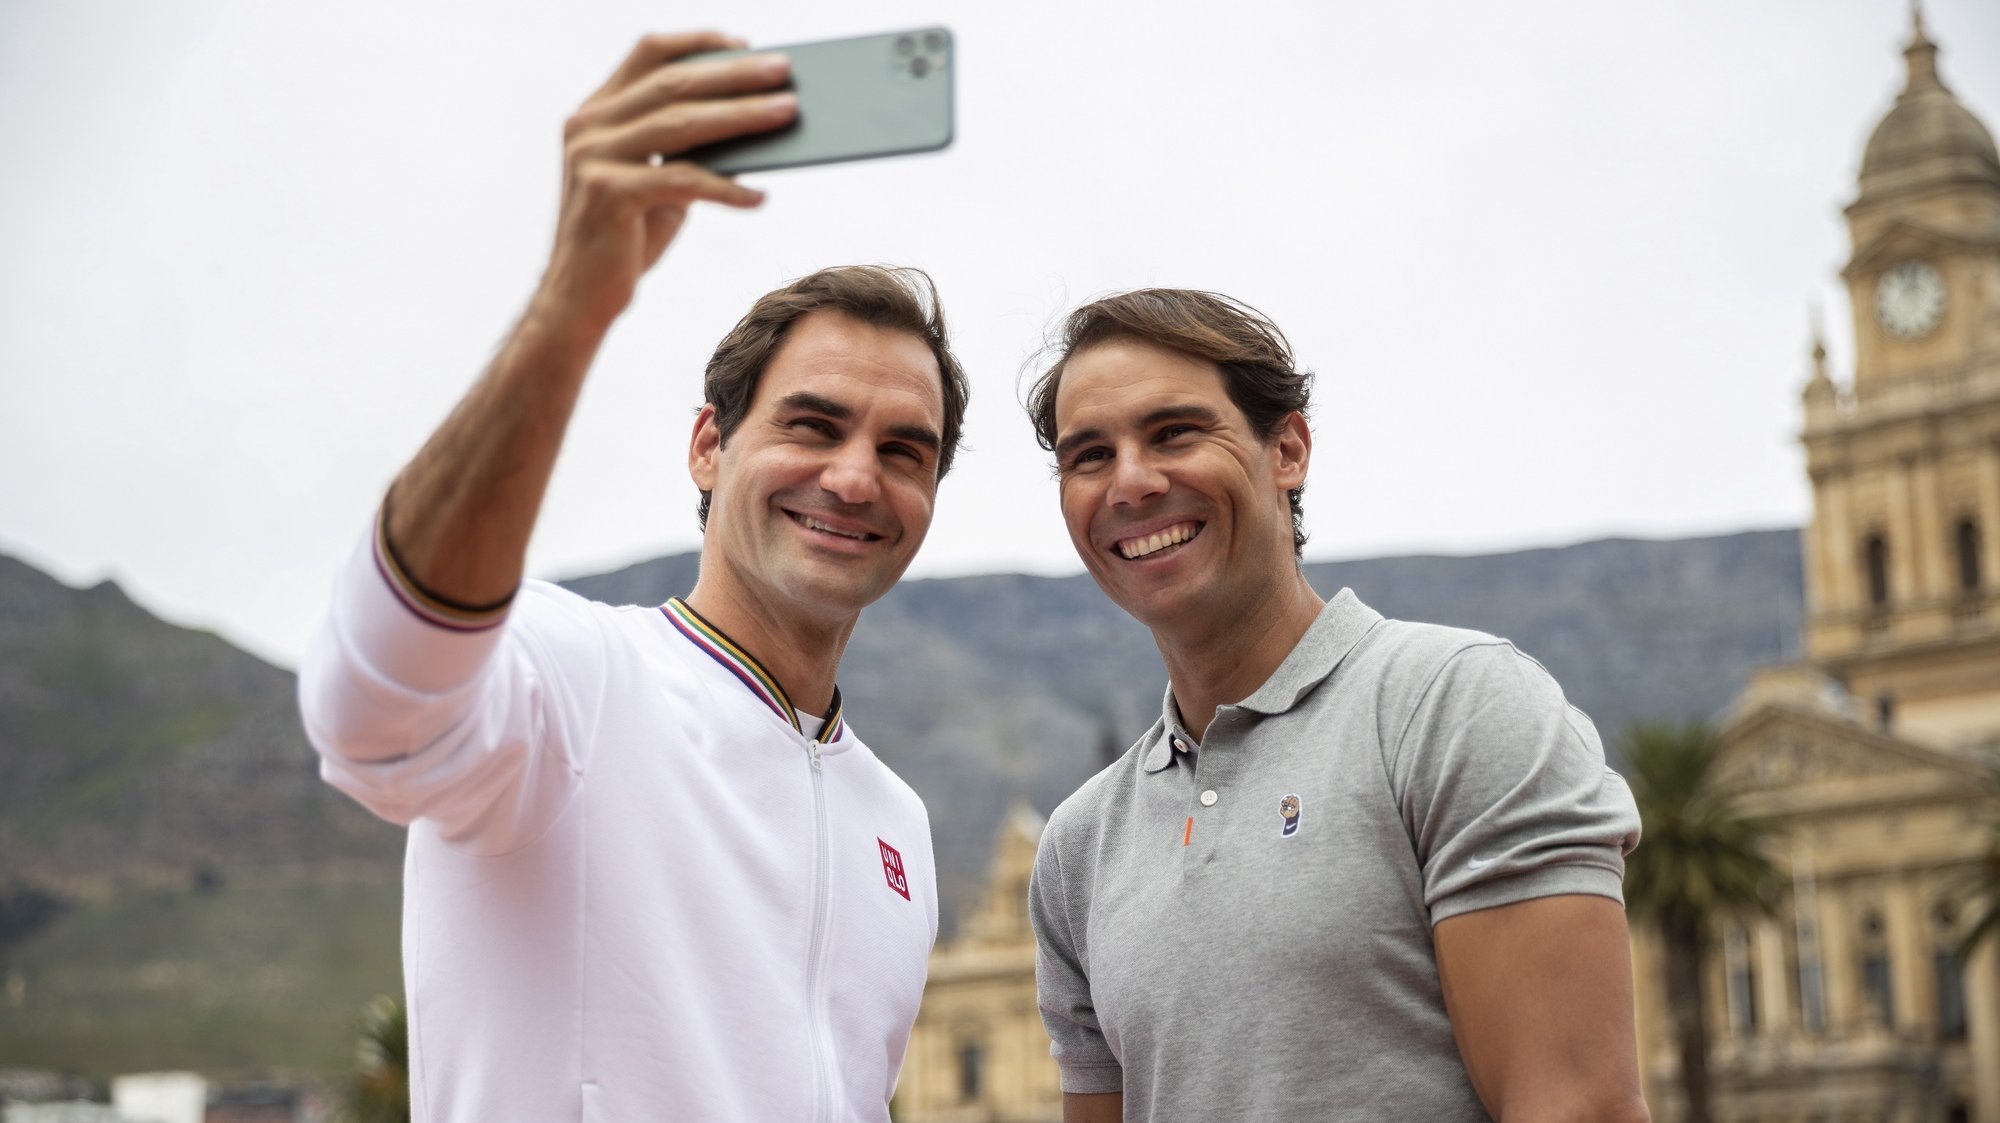 epaselect epa08199947 Roger Federer of Switzerland (L) and Rafael Nadal of Spain (R) take a selfie after playing mini tennis on the Cape Town Grand Parade infront of the City Hall and Table Mountain ahead of their exhibition match, South Africa 07 February 2020. Roger Federer will play Rafael Nadal in the Match in Africa Cape Town charity event at Cape Town Stadium on 07 February 2020. Presented by Rolex the Match in Africa is for the benefit of the Roger Federer foundation..  EPA/NIC BOTHMA